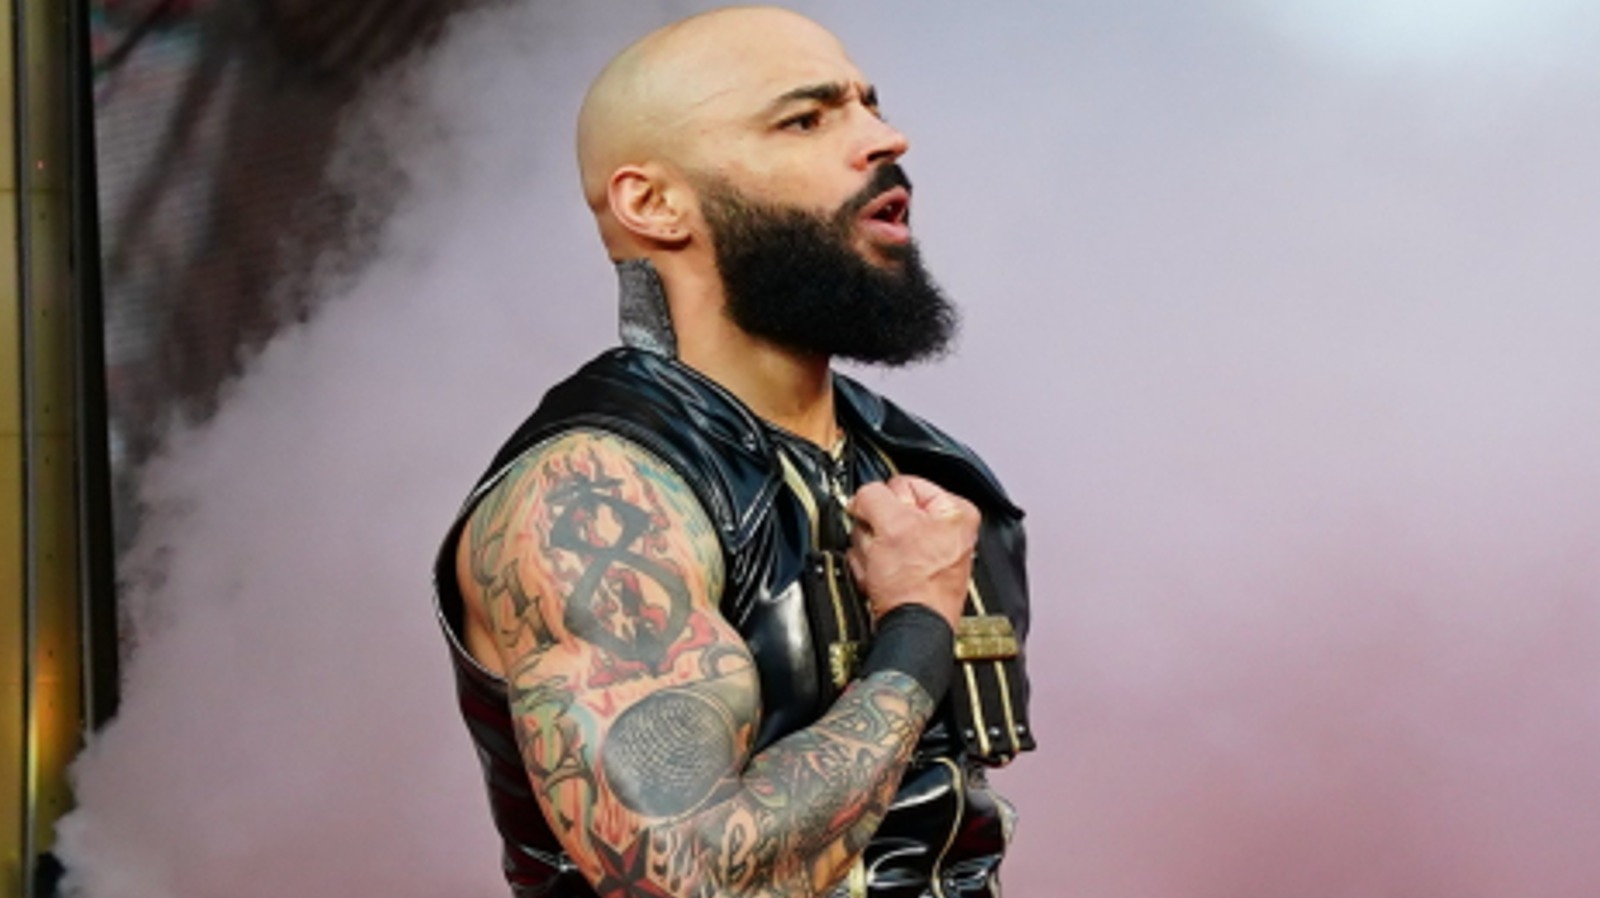 Ricochet Was Reduced To Tears Following Lucha Underground Match With Rey Mysterio